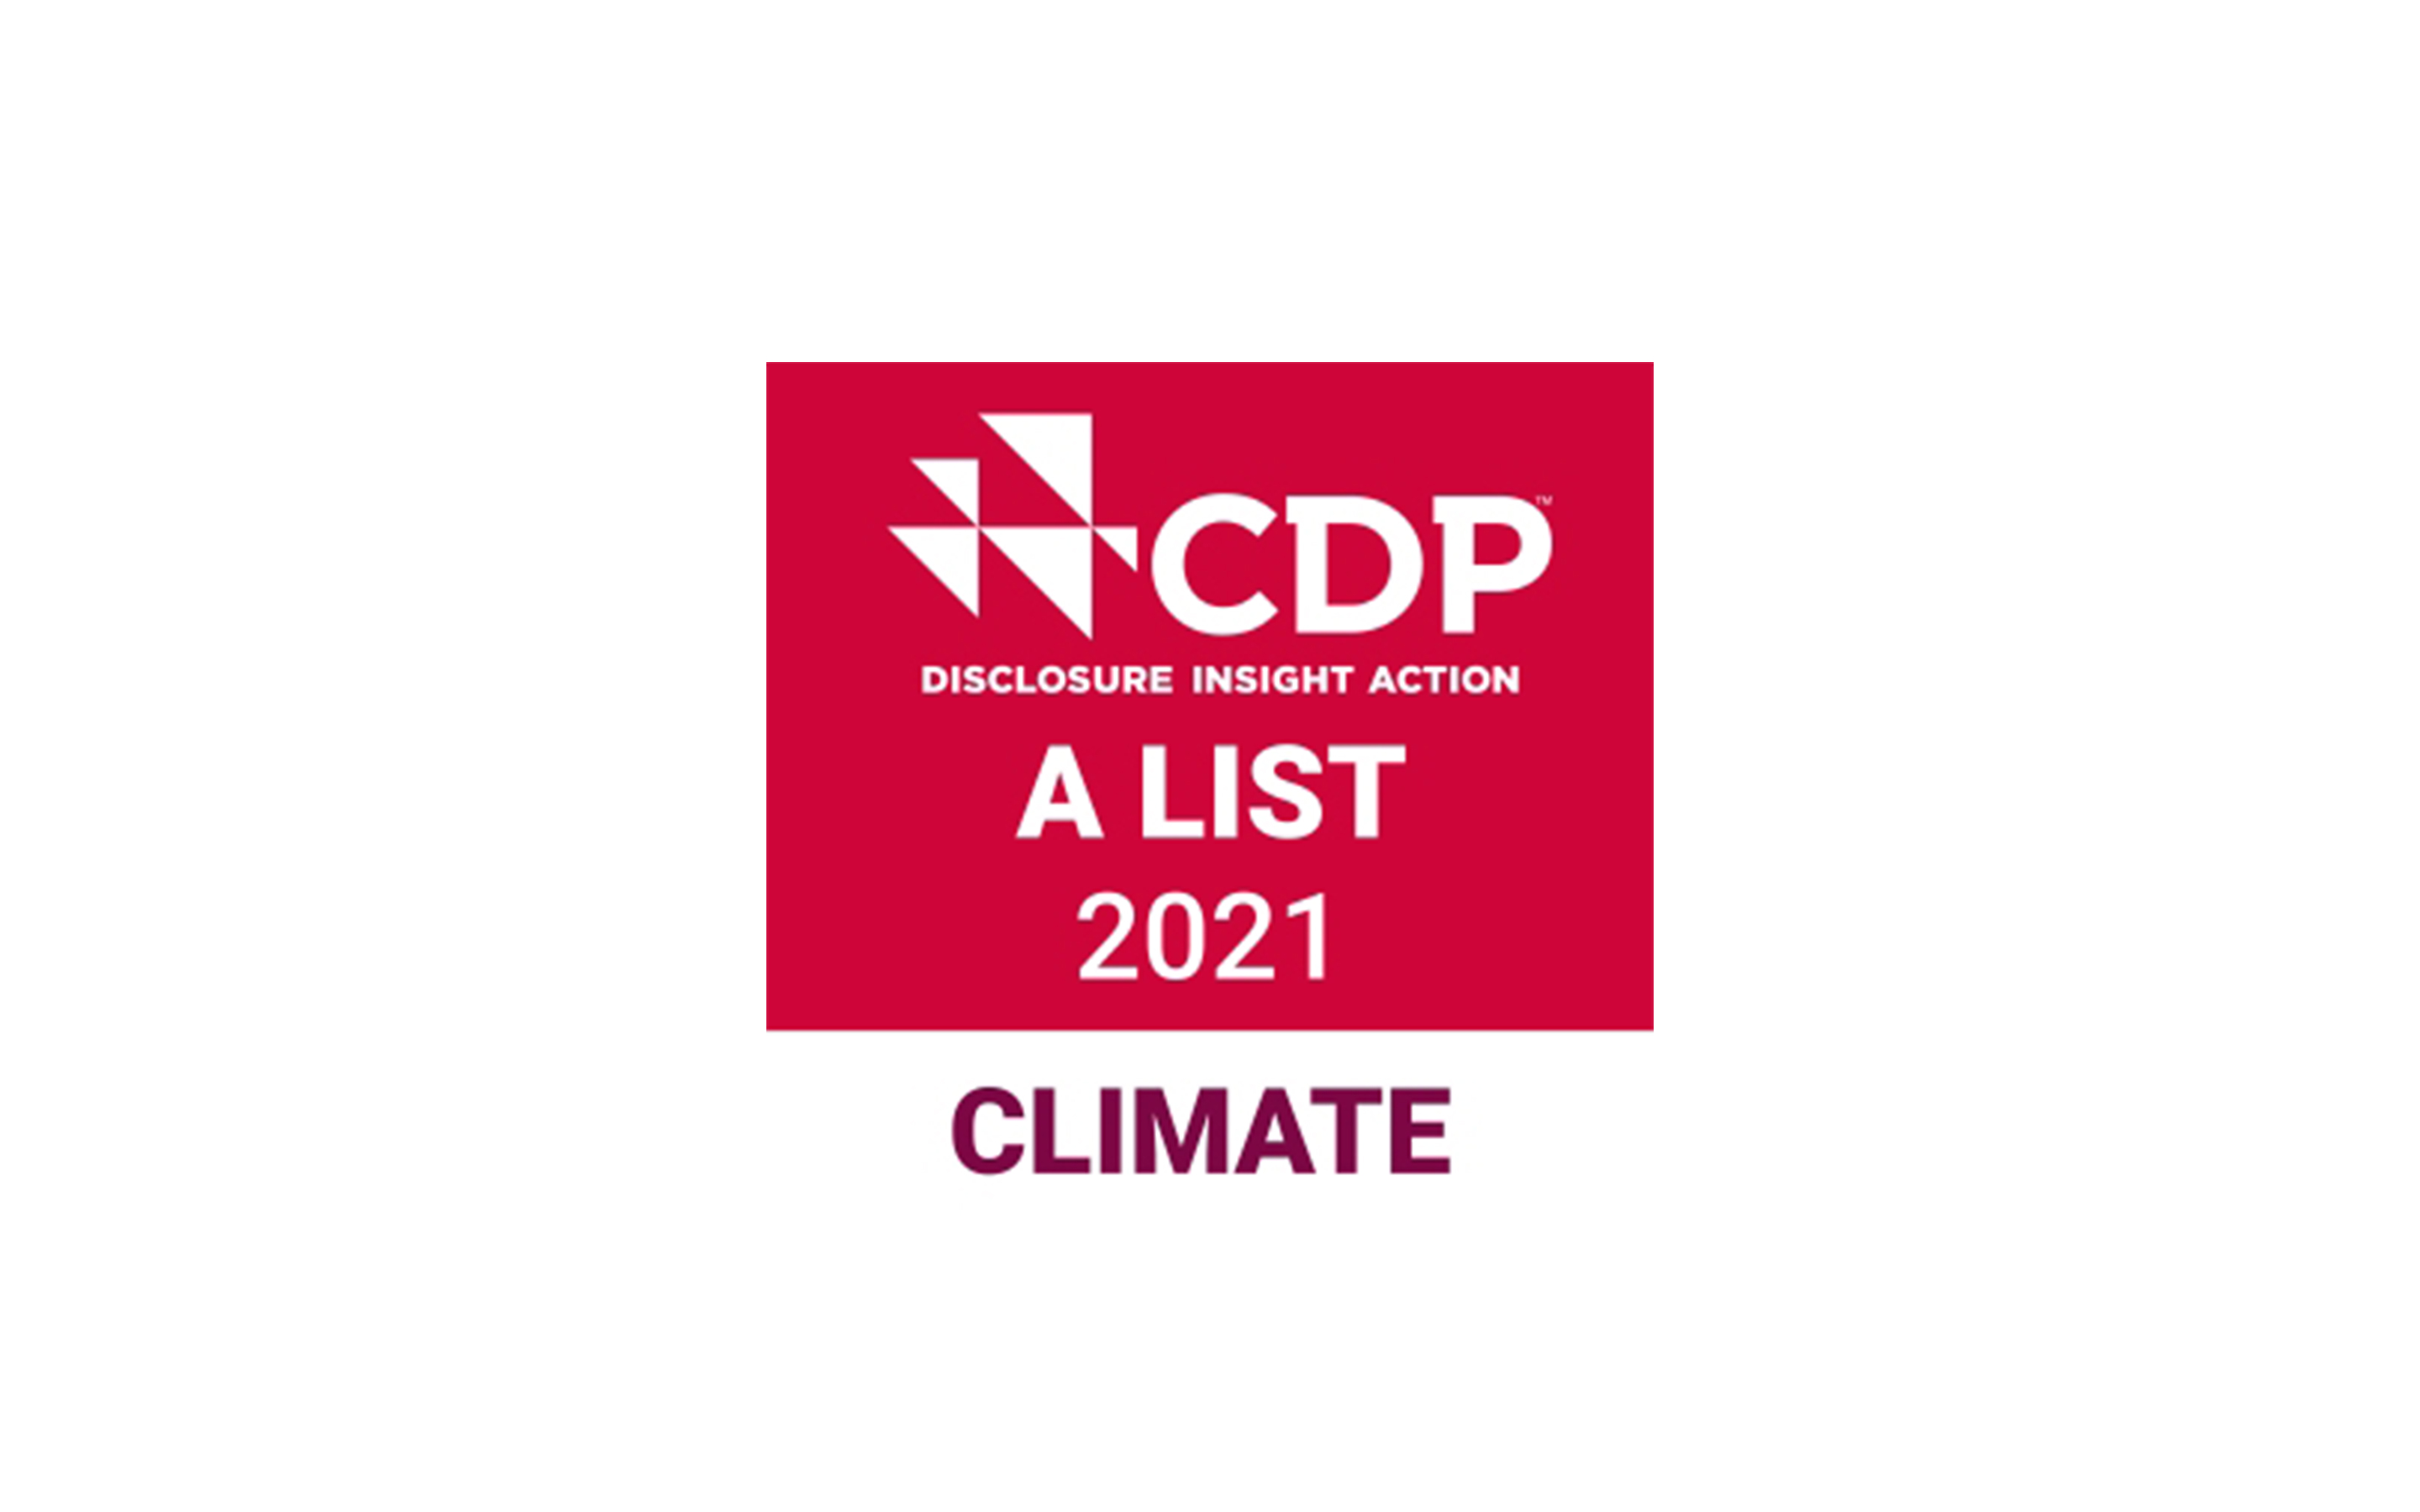 Read more aboutWe achieved CDP A List recognition